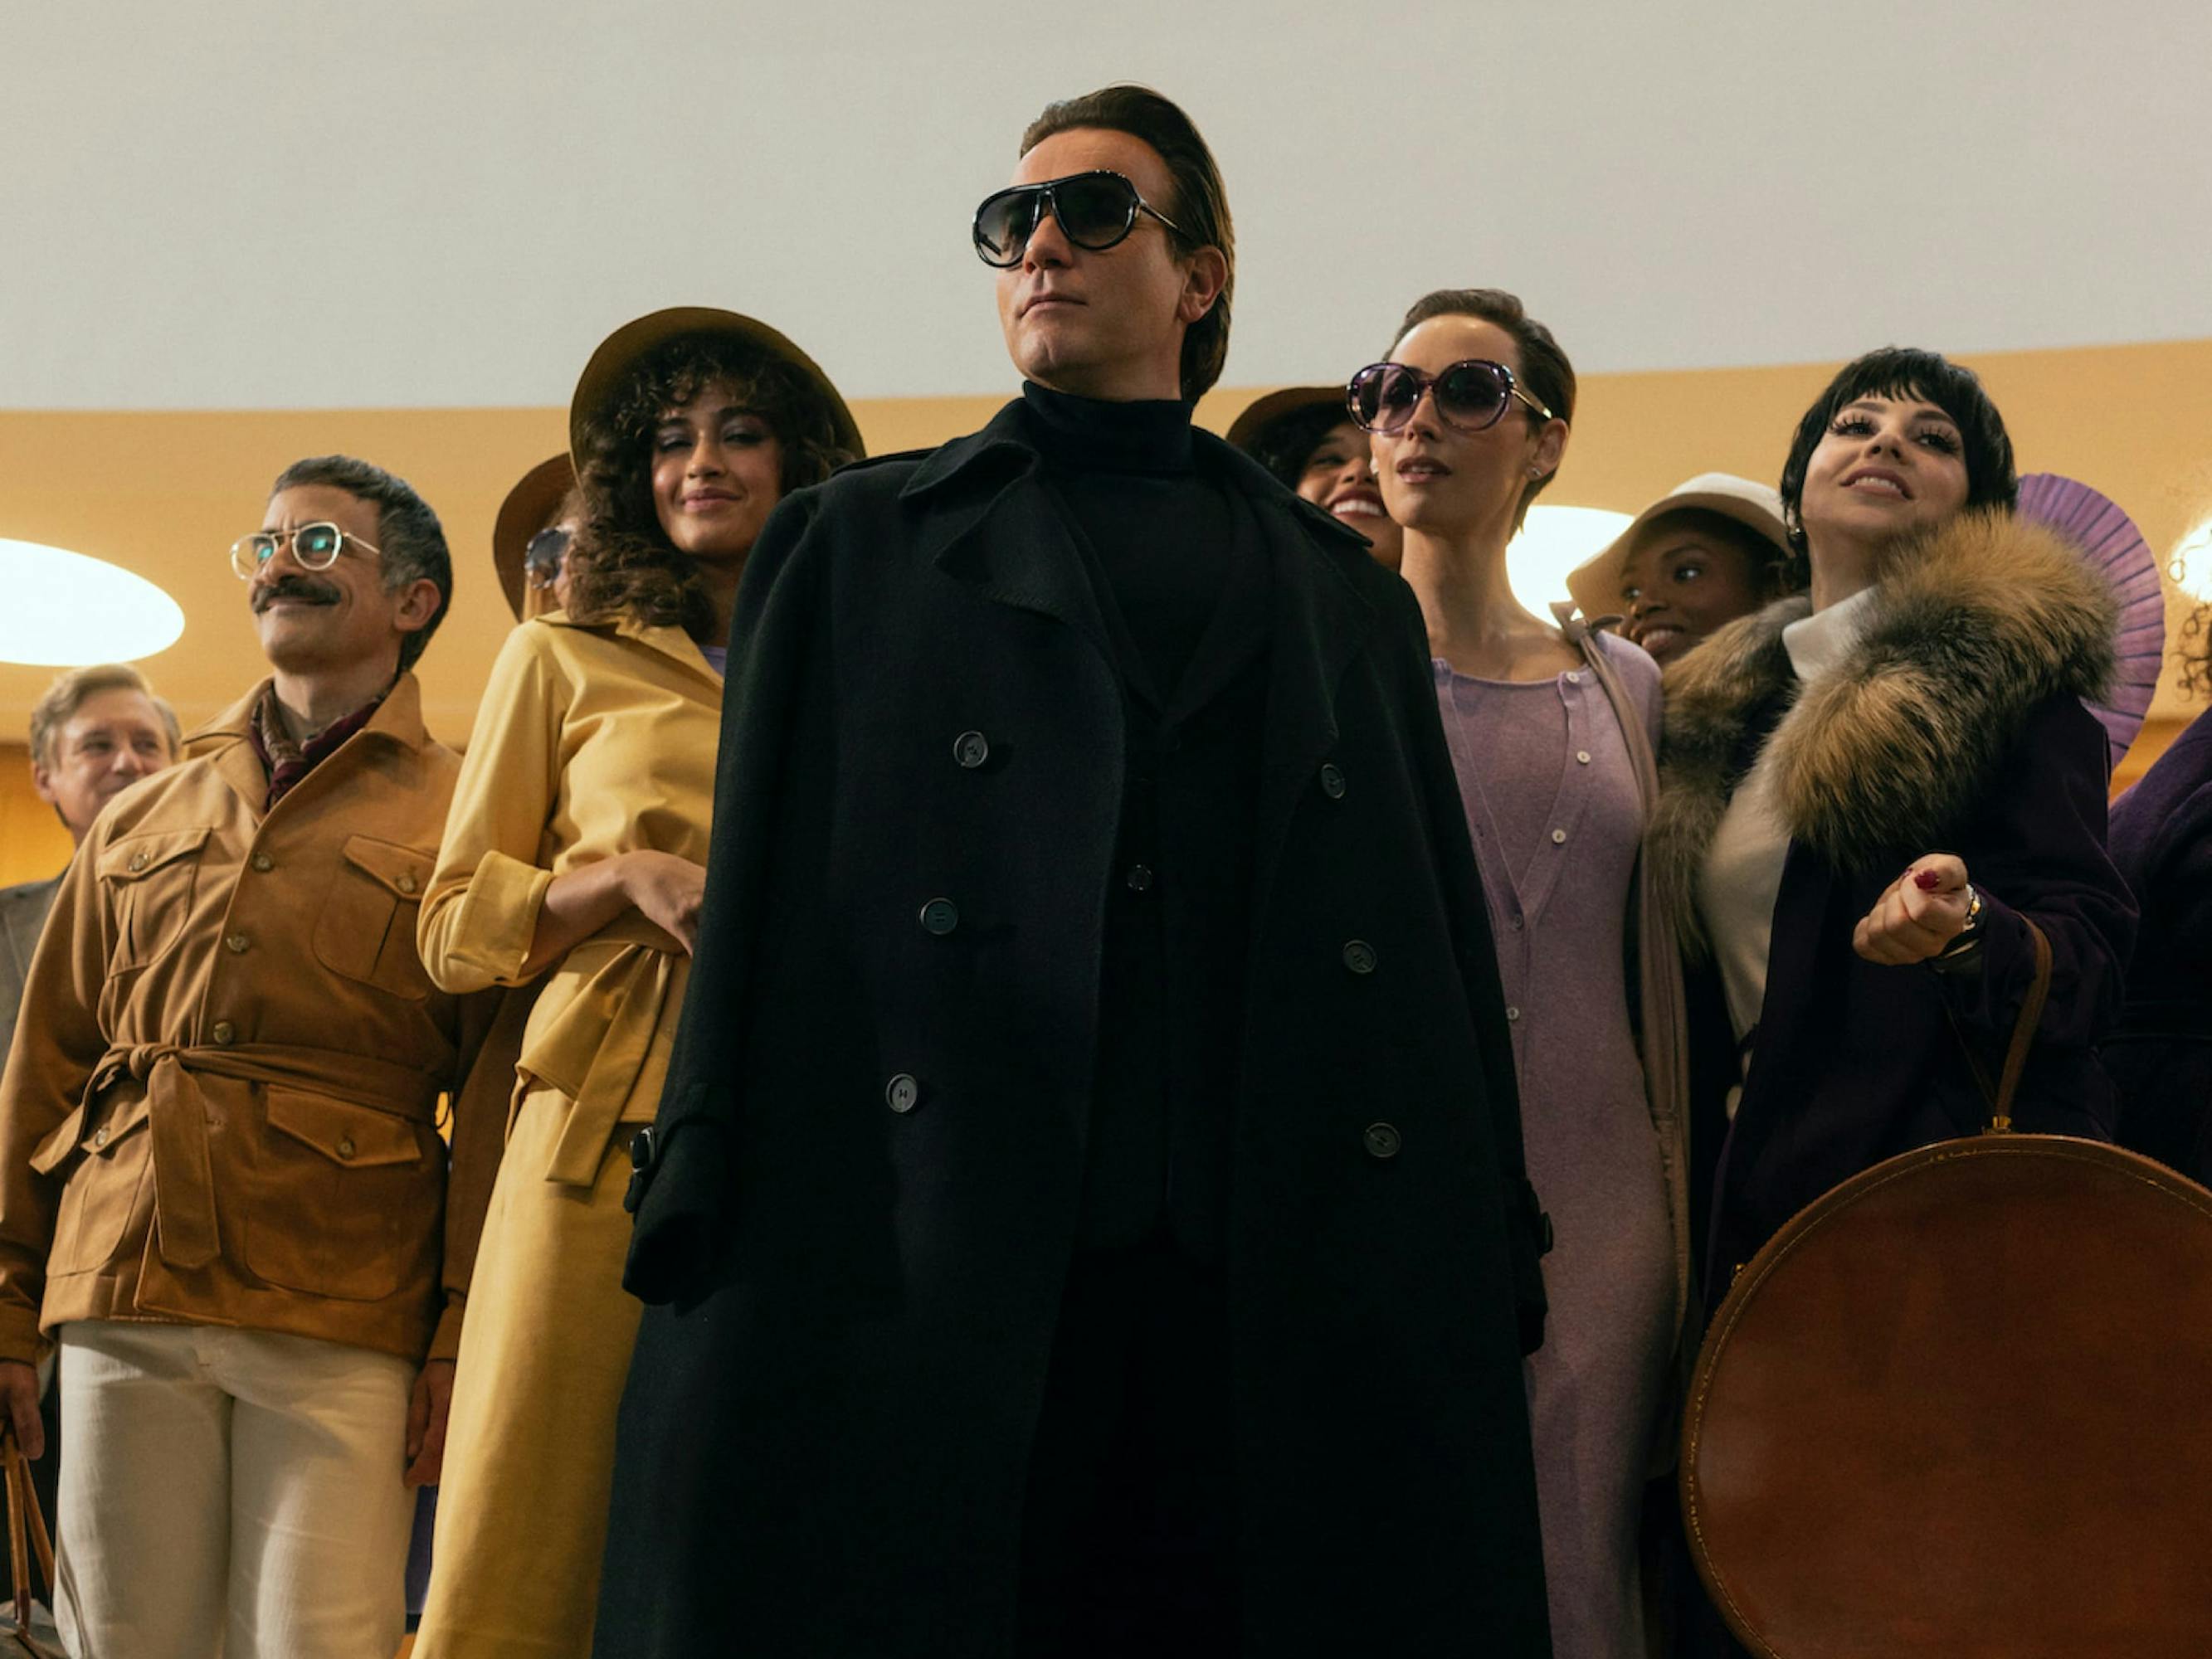 Halston (Ewan McGregor) wears a black double breasted coat, black turtleneck, black pants, and black glasses. Behind him stand an assortment of people wearing tans, purples, and blacks. Liza Minnelli (Krysta Rodriguez stands to his left, wearing a fabulous fur lined coat and carrying a brown circular bag. All of the people in this shot look off into the distance as if about to embark on an adventure.